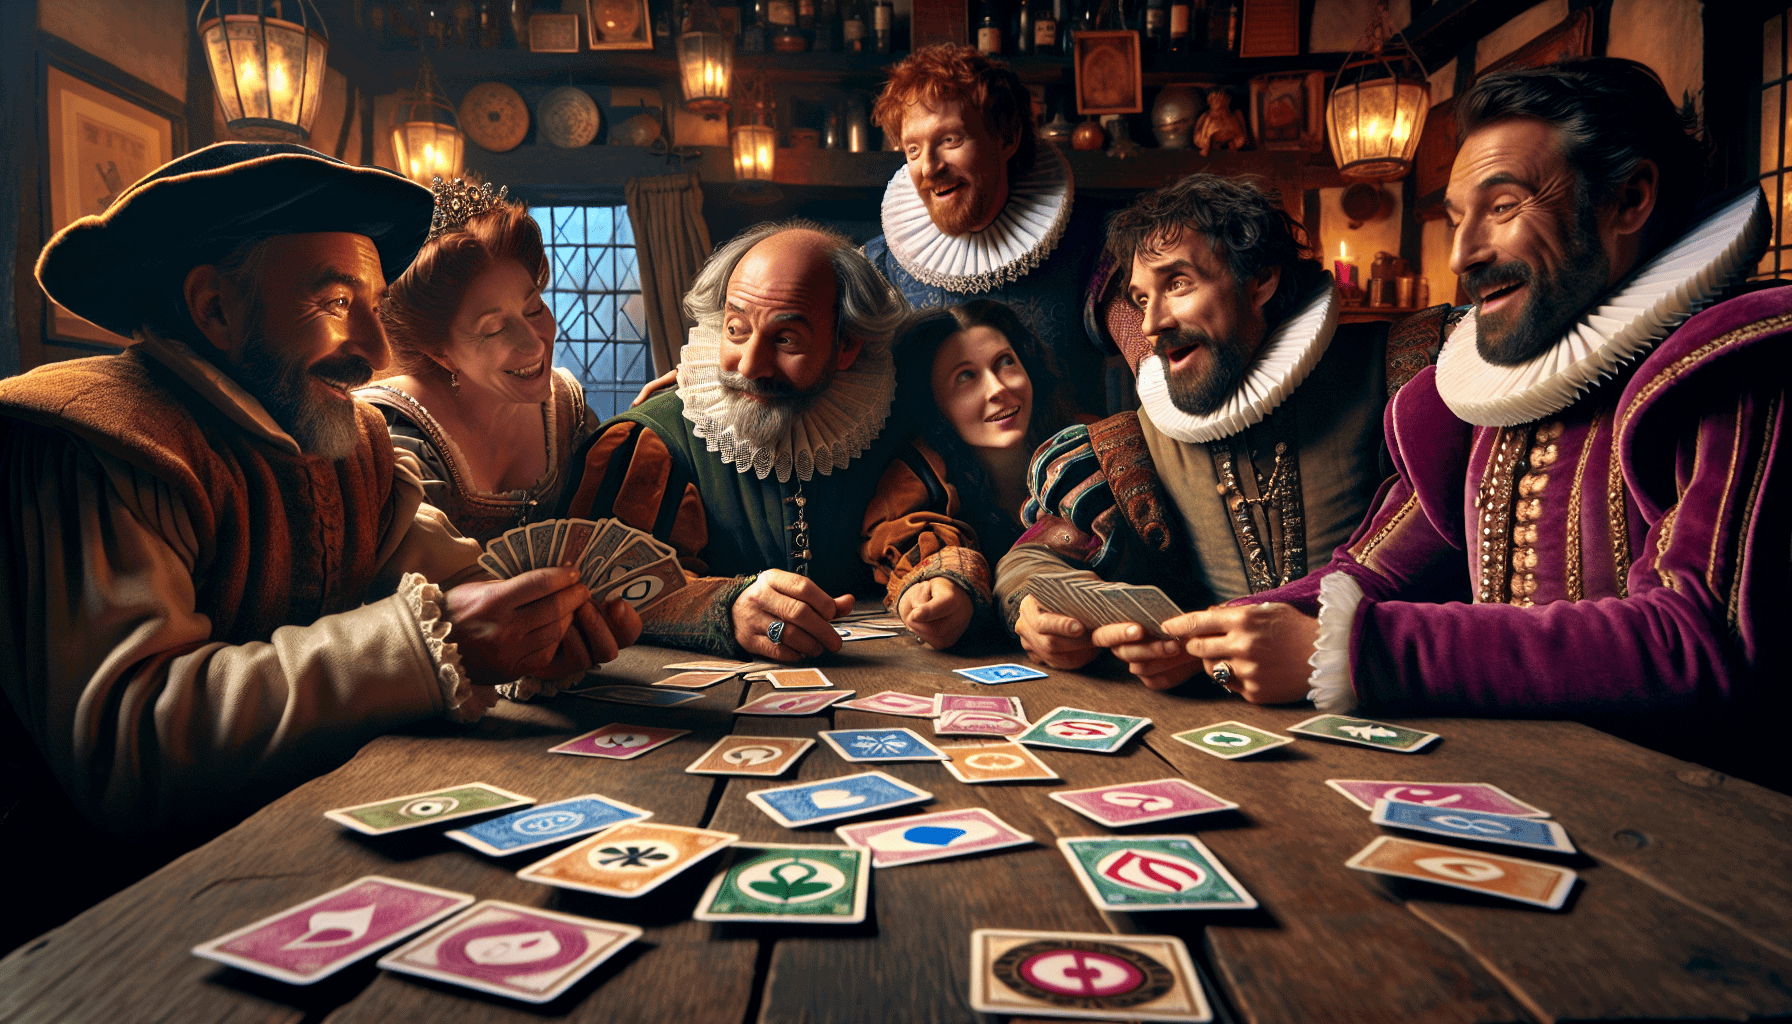 Illustration of Shakespearean characters playing a book lover games Bards Dispense Profanity